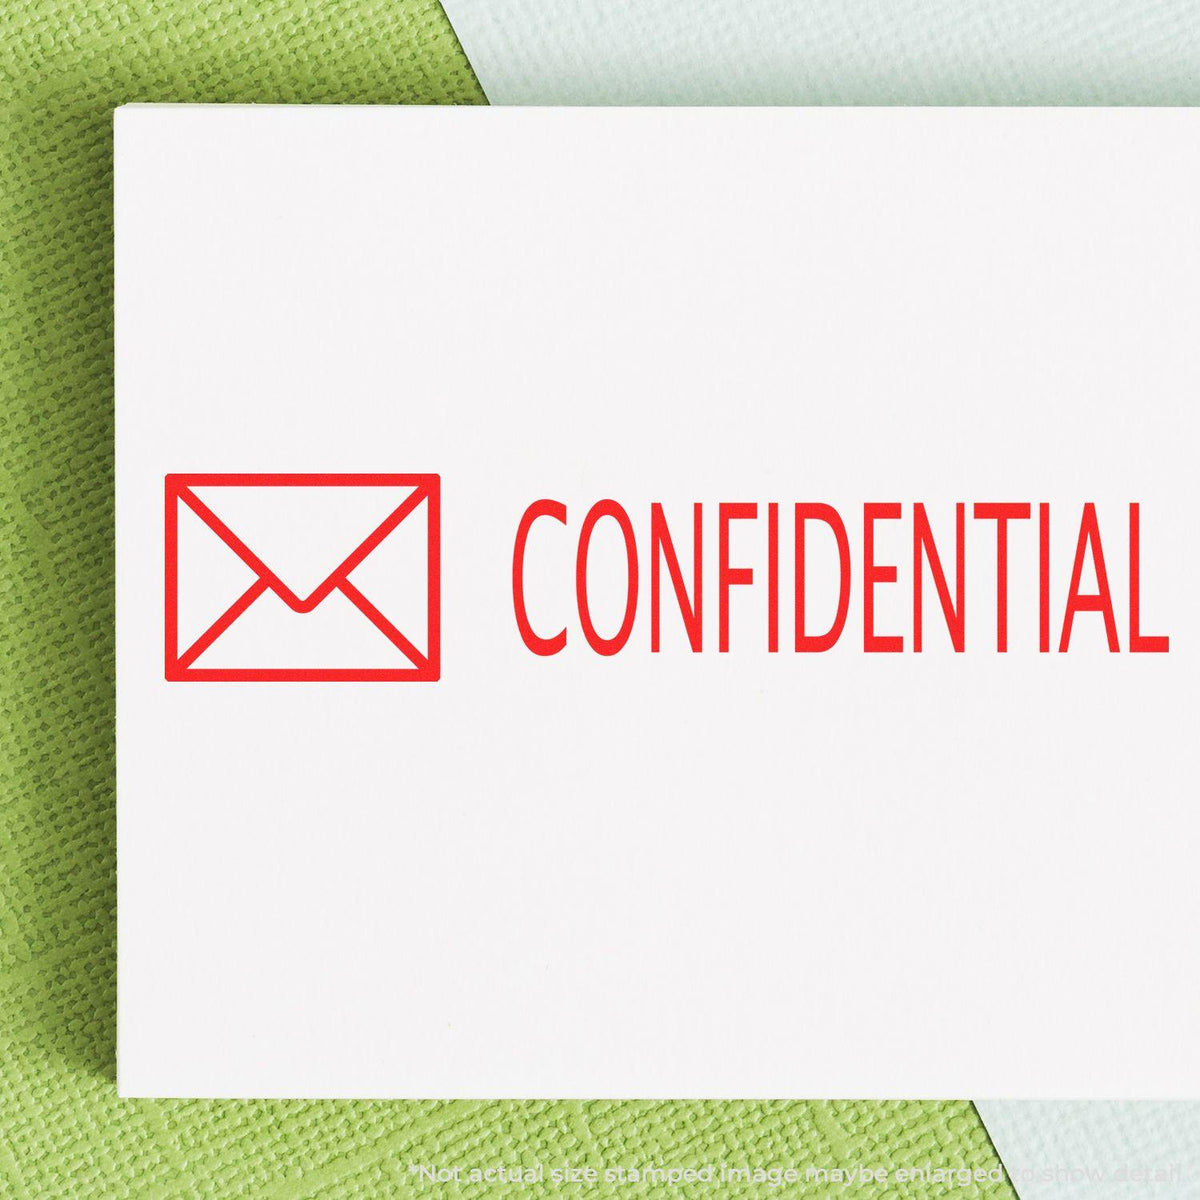 In Use Large Self-Inking Confidential with Envelope Stamp Image